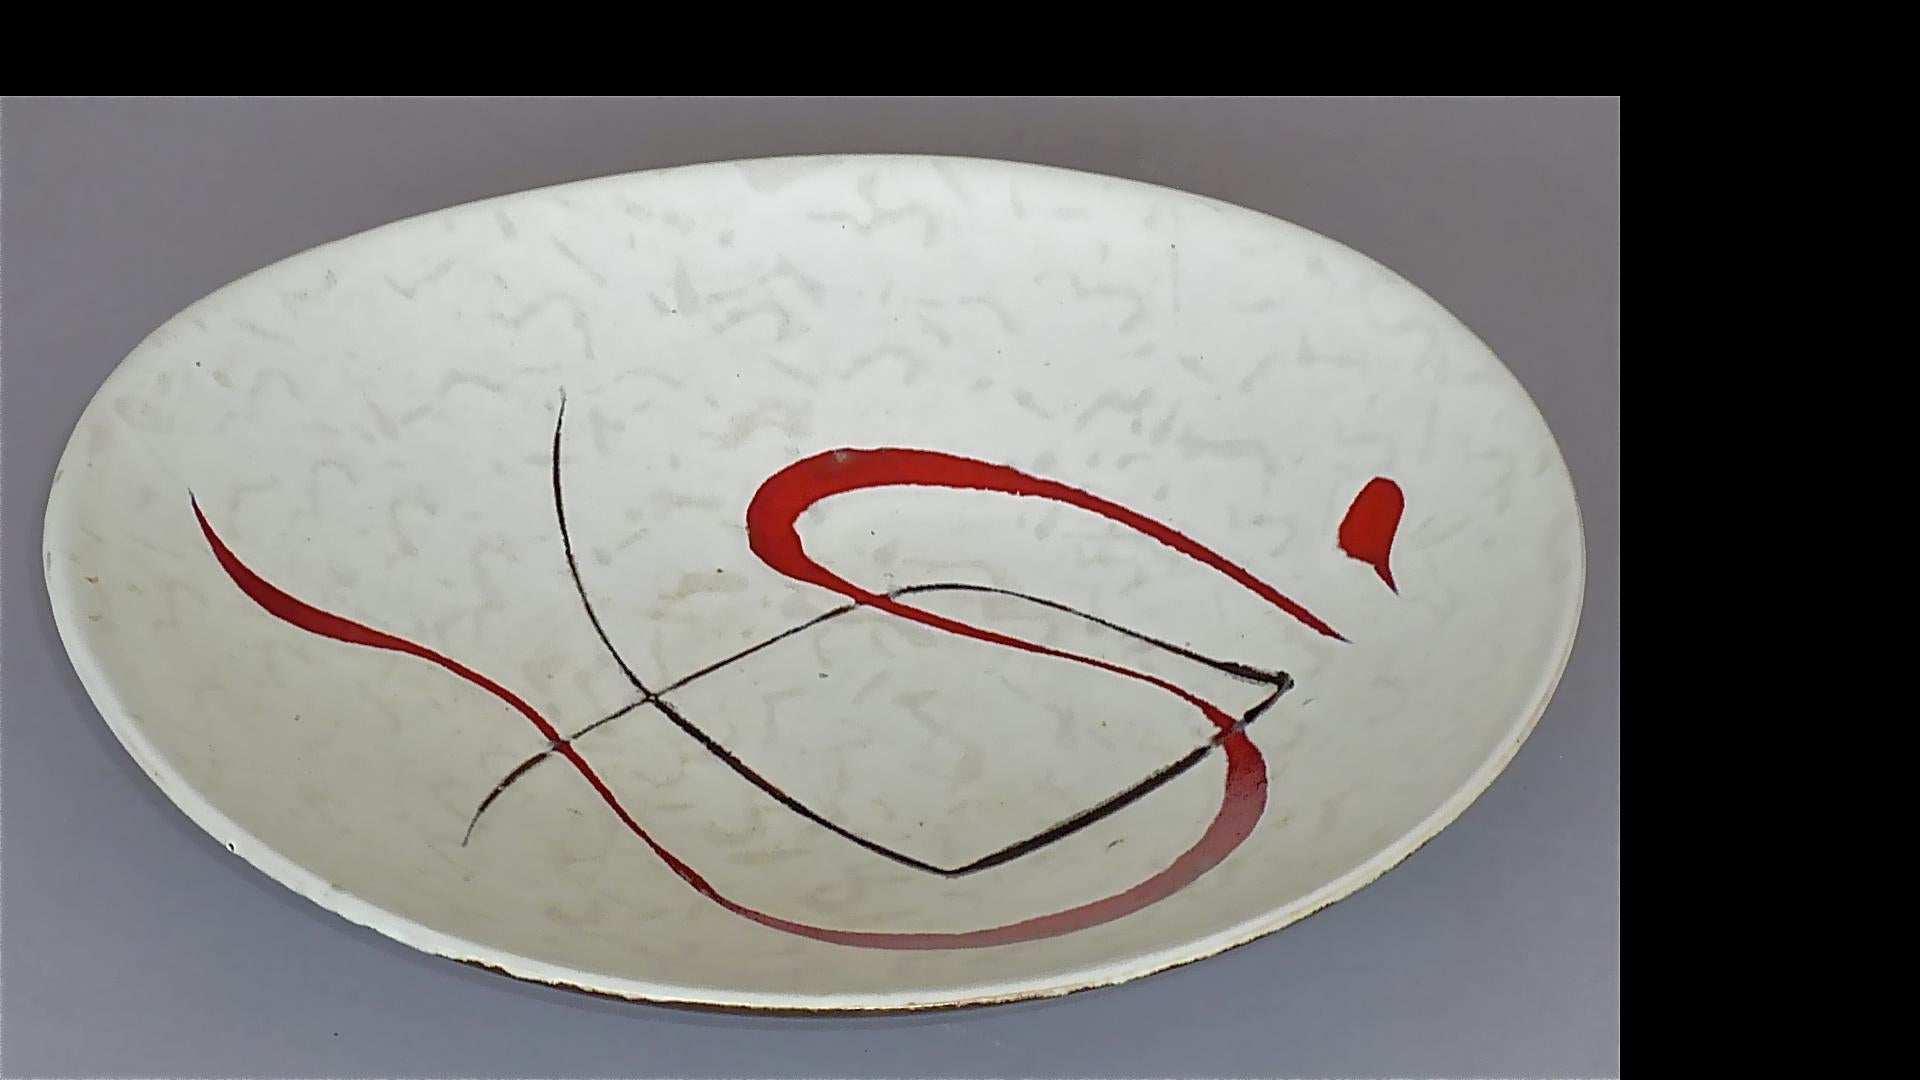 Abstract Midcentury Art Ceramic Vase and Bowl Gambone Miro Style White Red 1950s For Sale 11